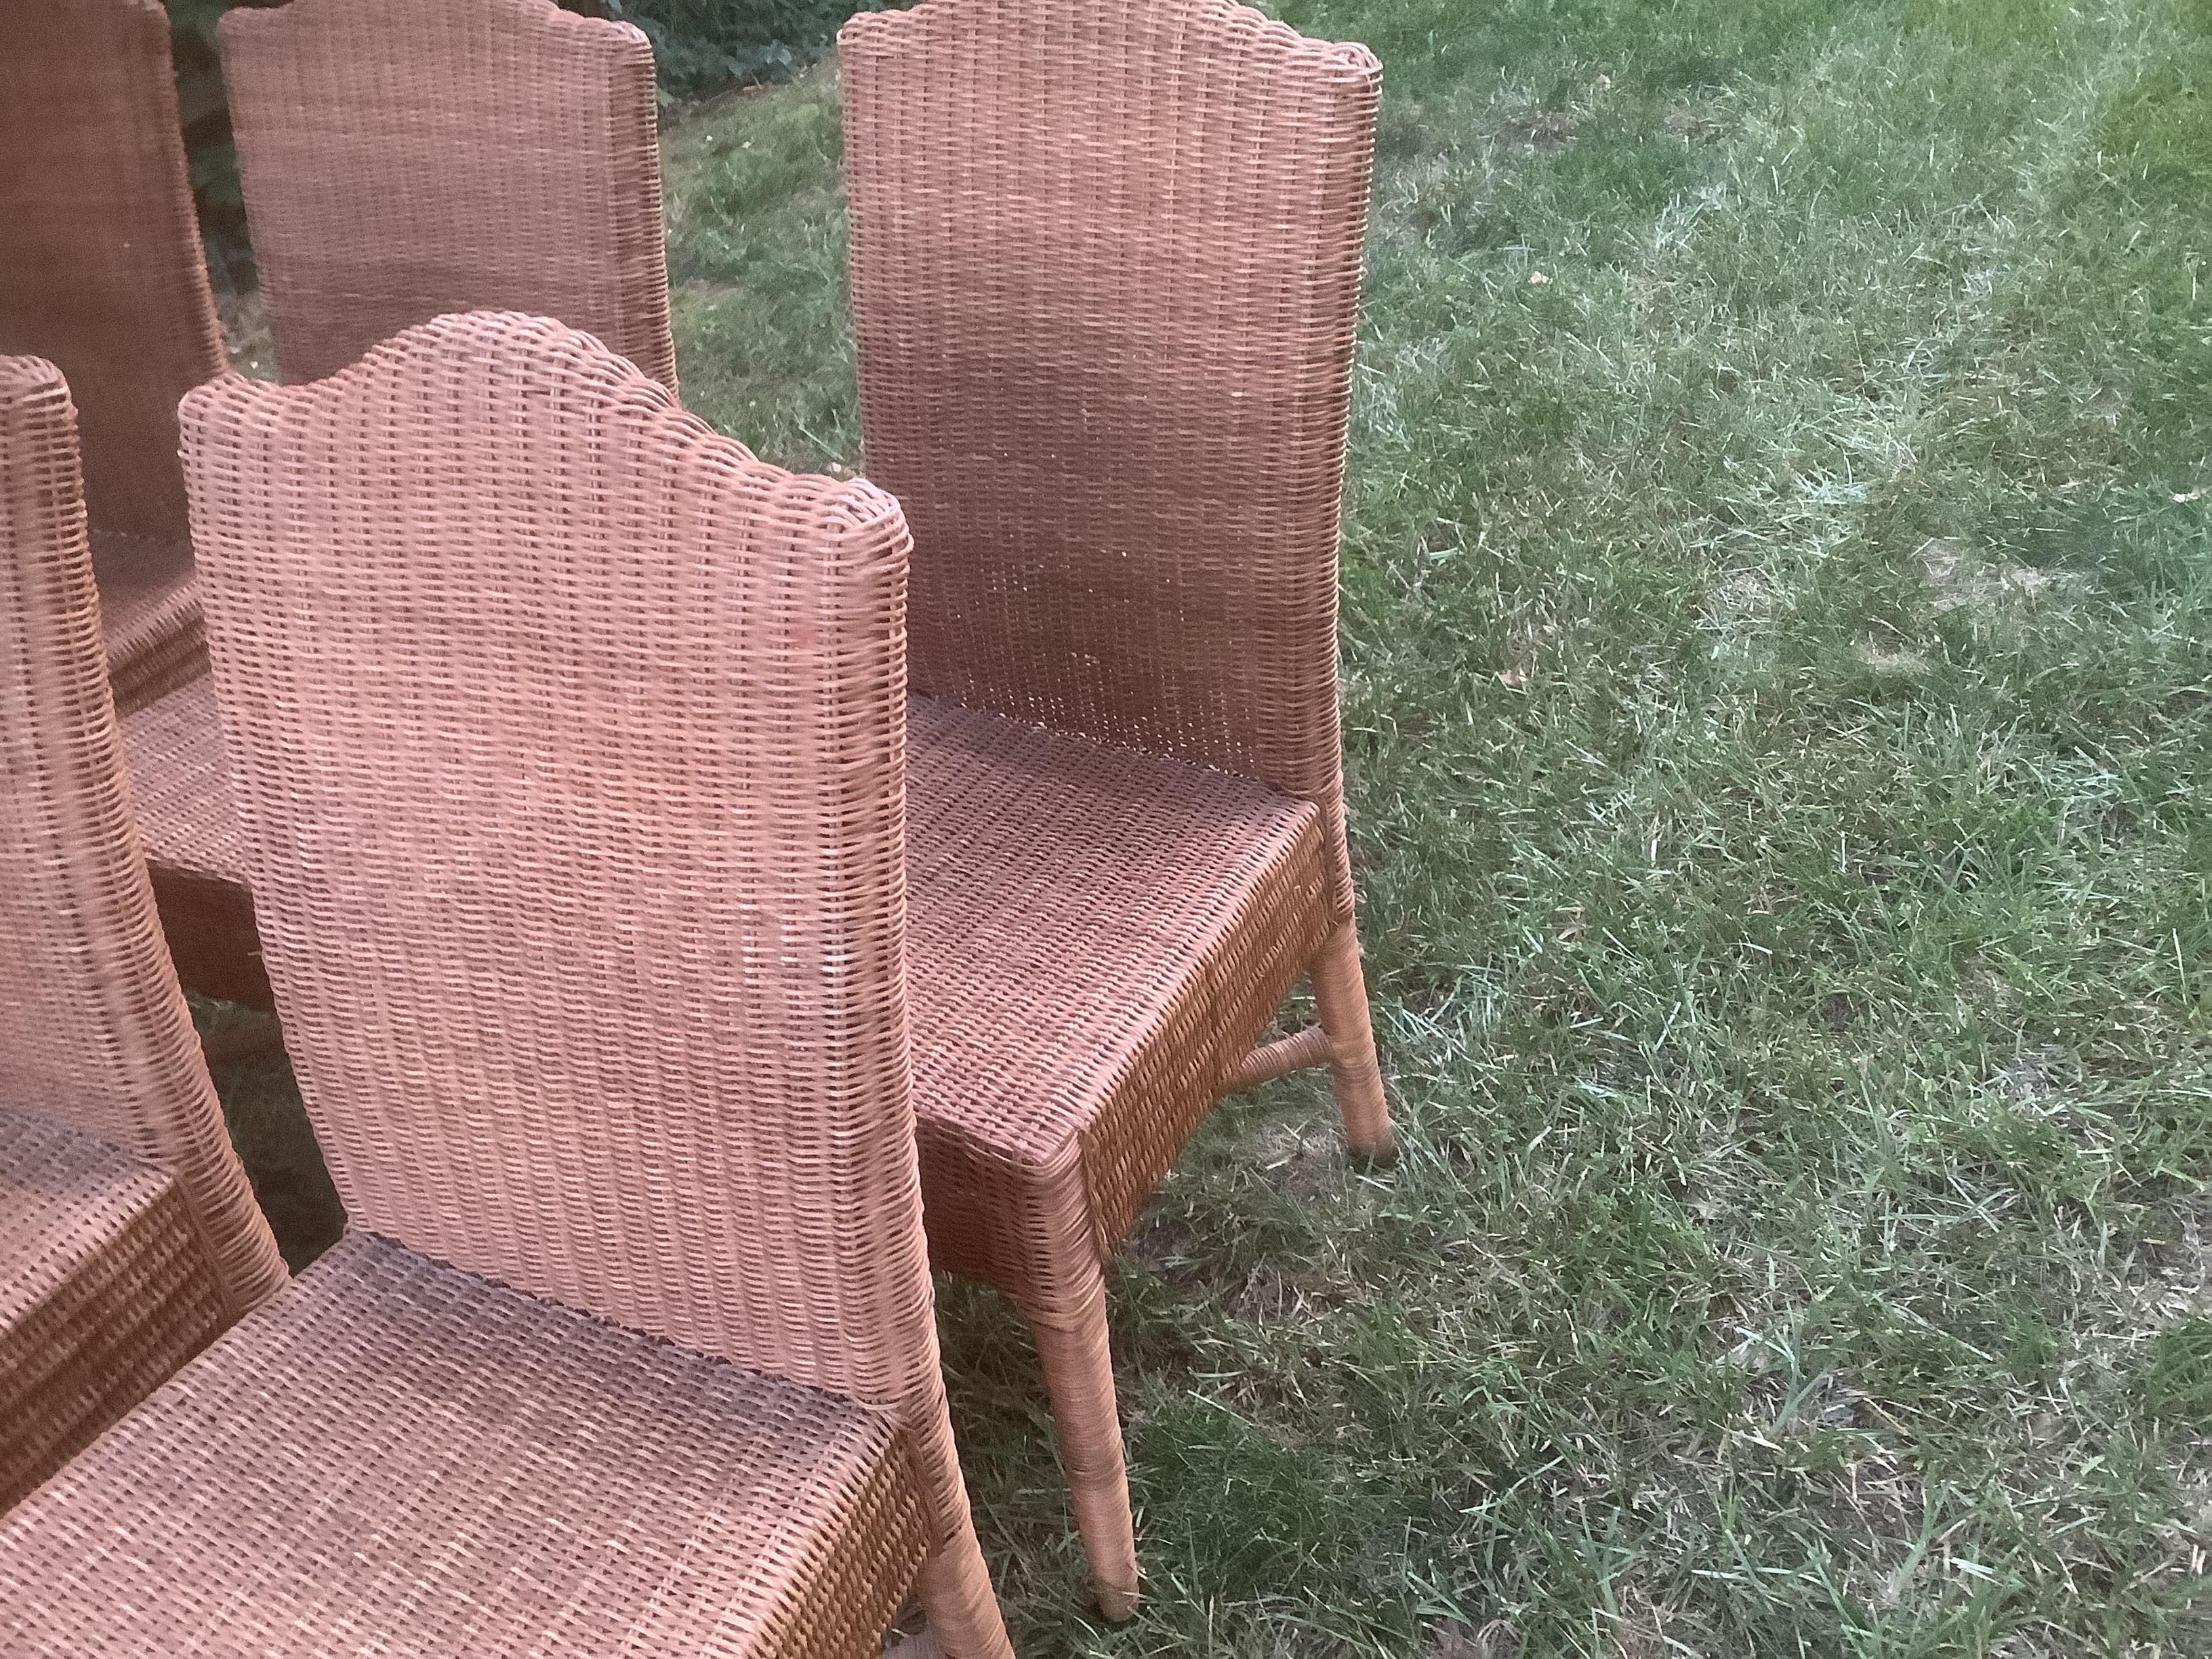 Set of Six Vintage Woven Wicker Dining Chairs. Each with an arched back and cross stretchers at the bottom of the legs to keep the frame of the chairs tight and secure. In good vintage condition with minor losses to wicker.